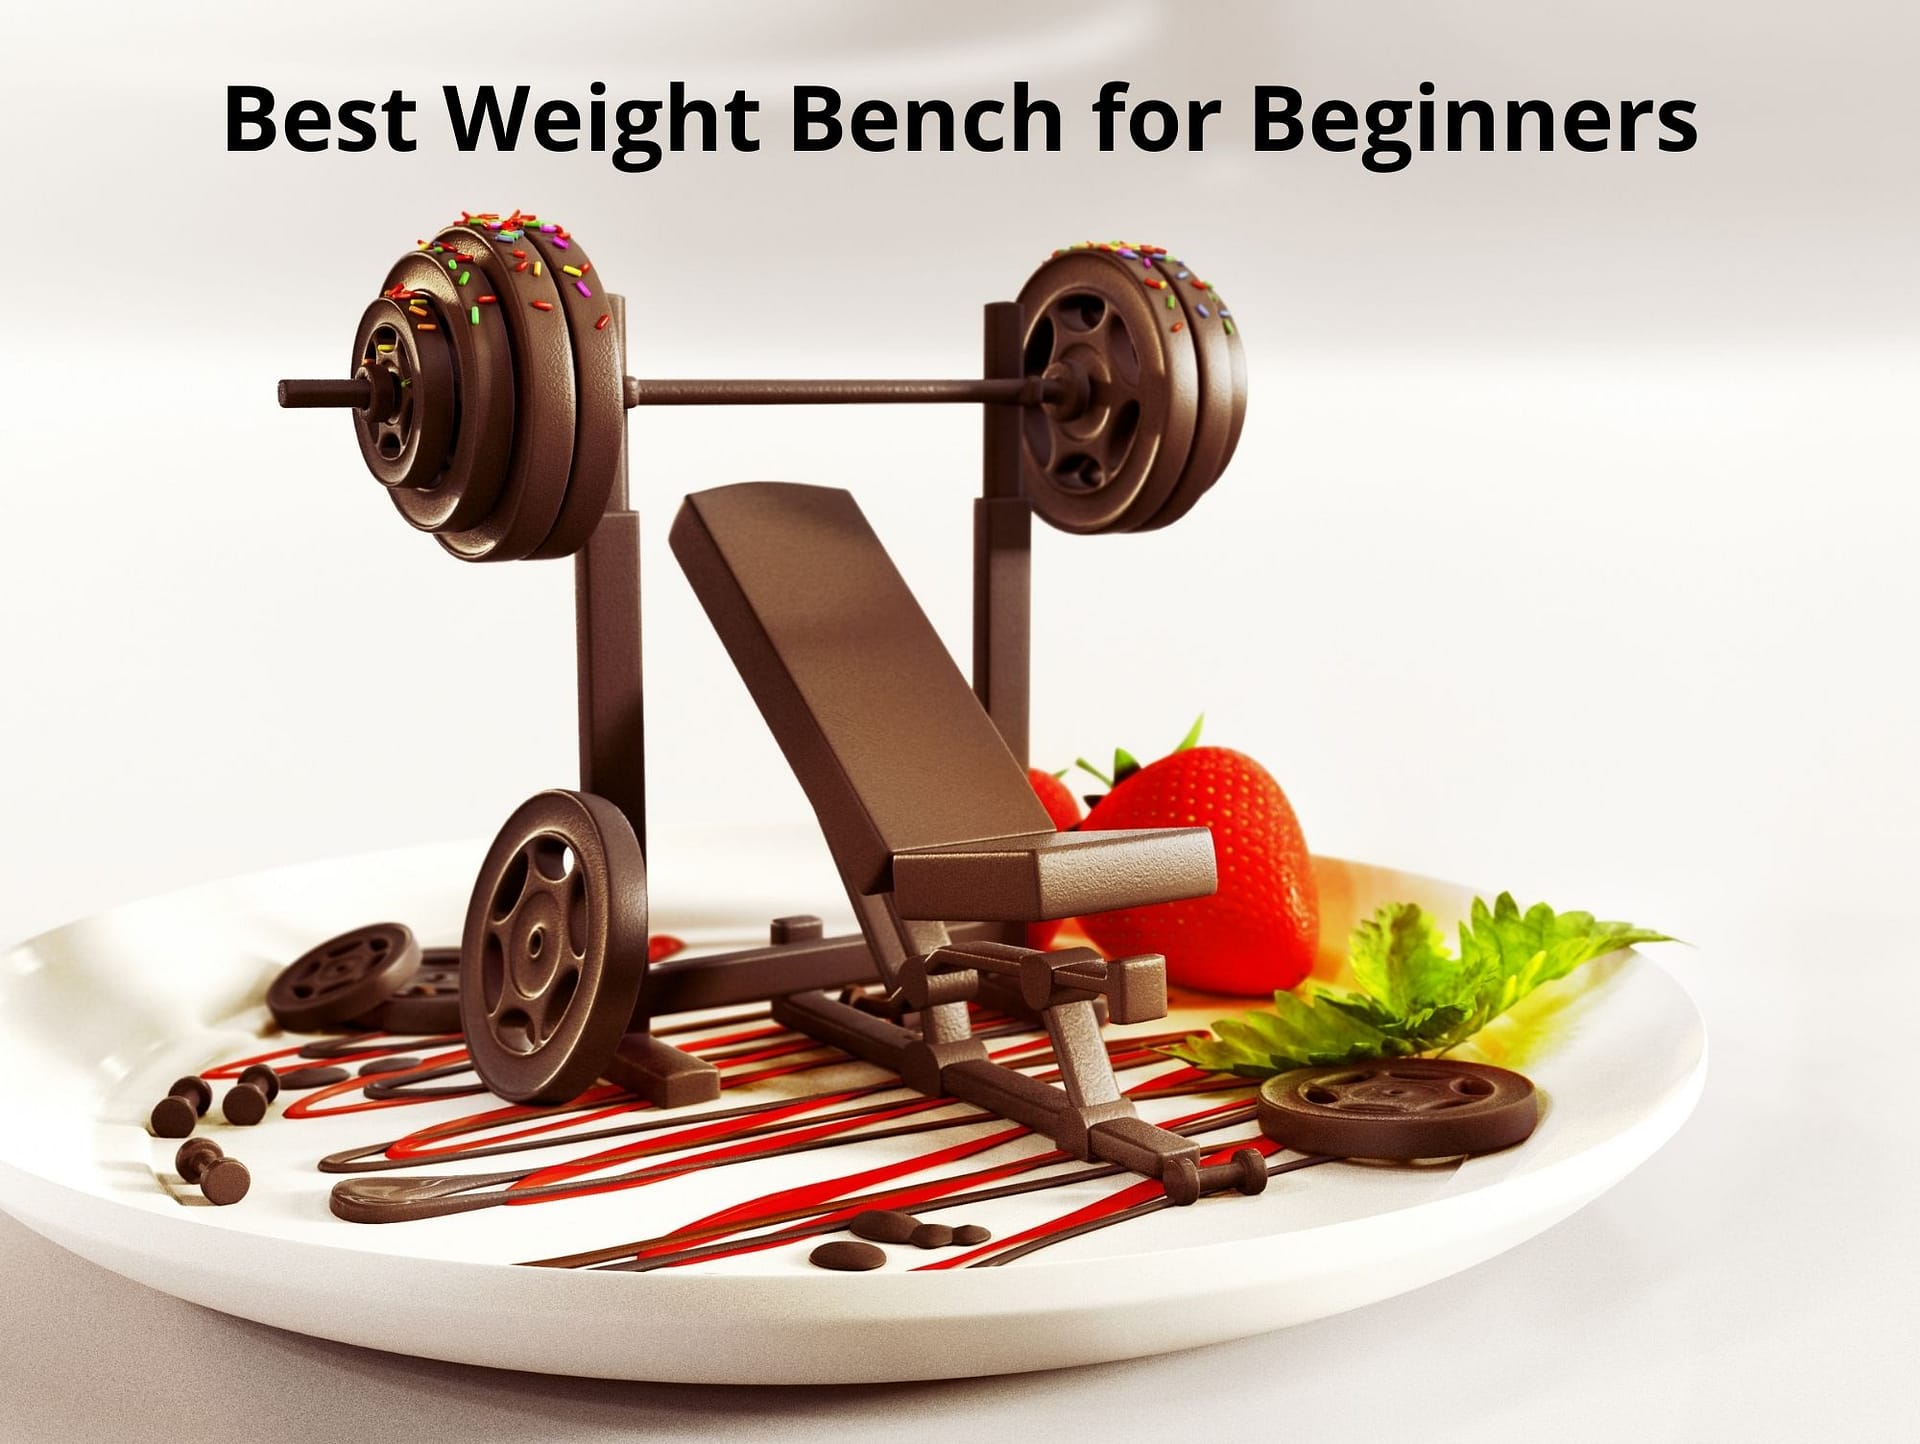 Best Weight Bench for Beginners